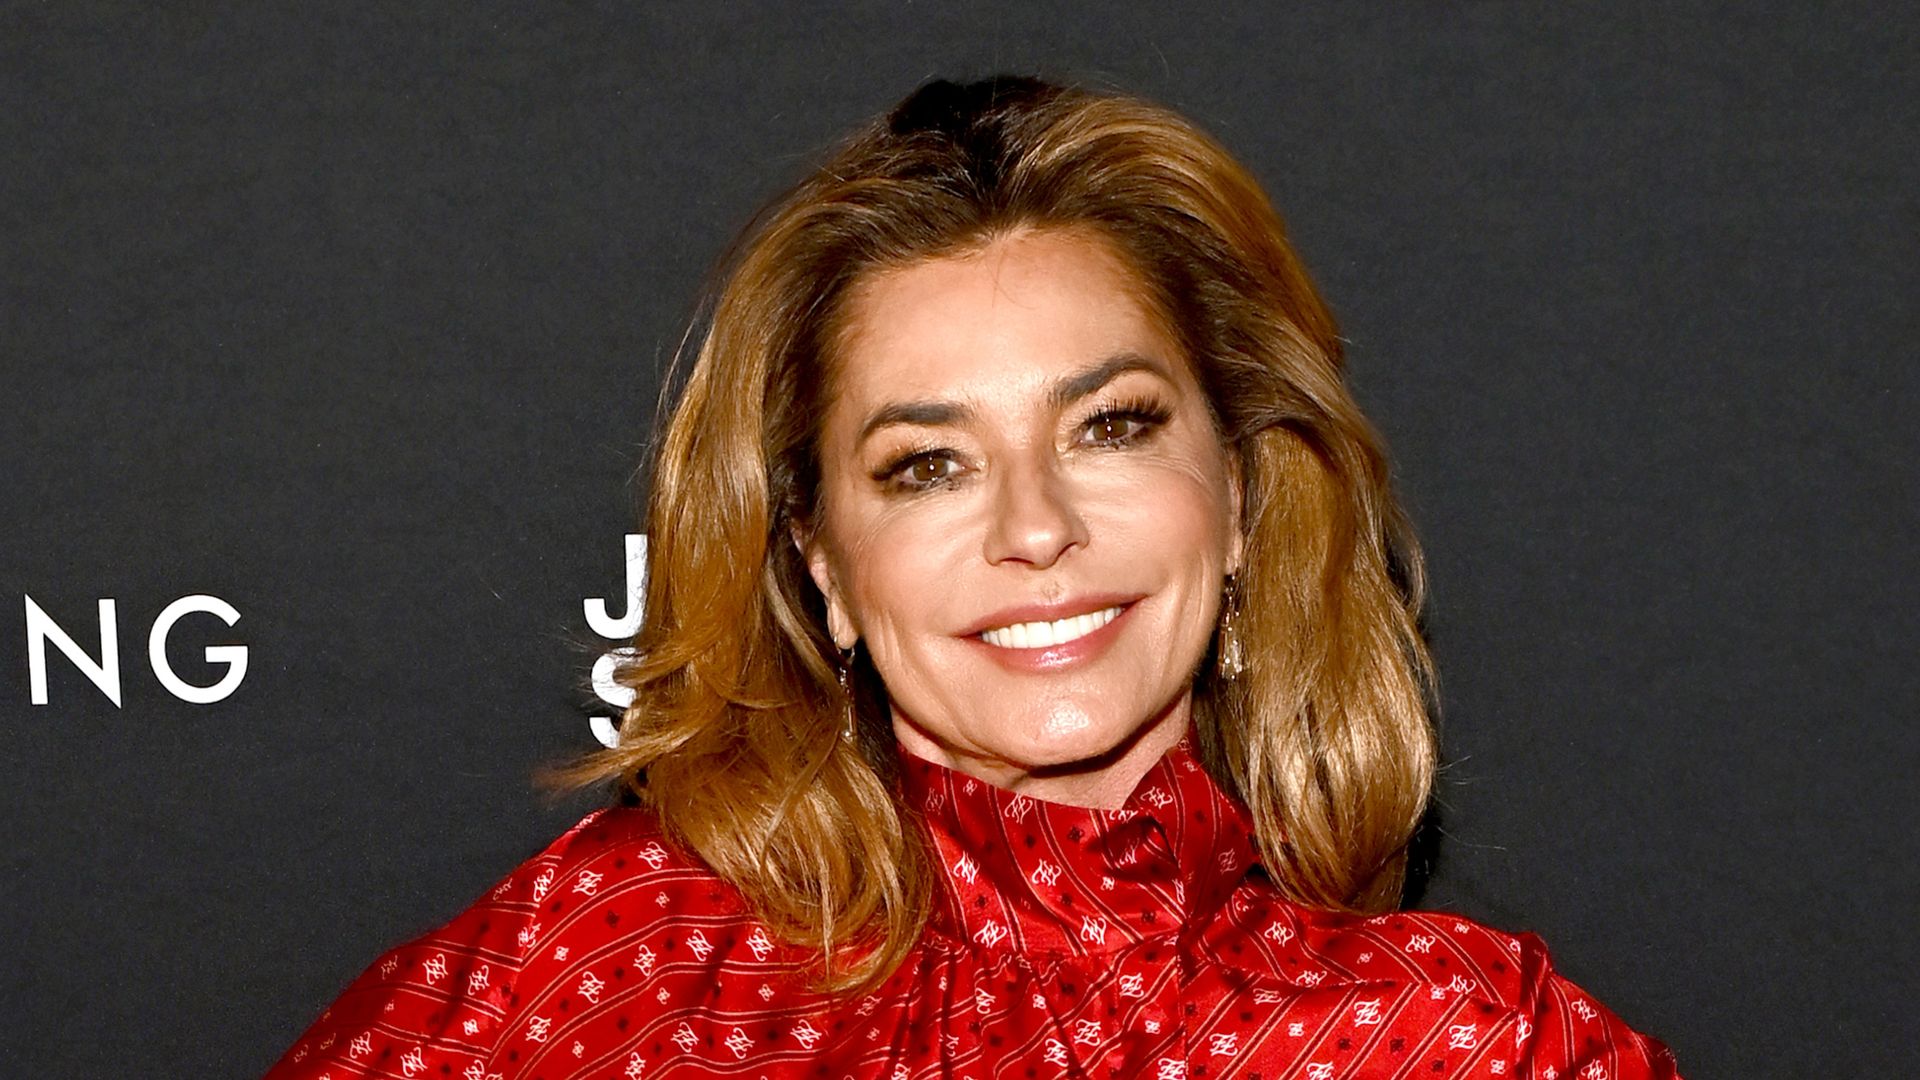 Shania Twain laughs off blunder on stage as fans react — here's what she had to say